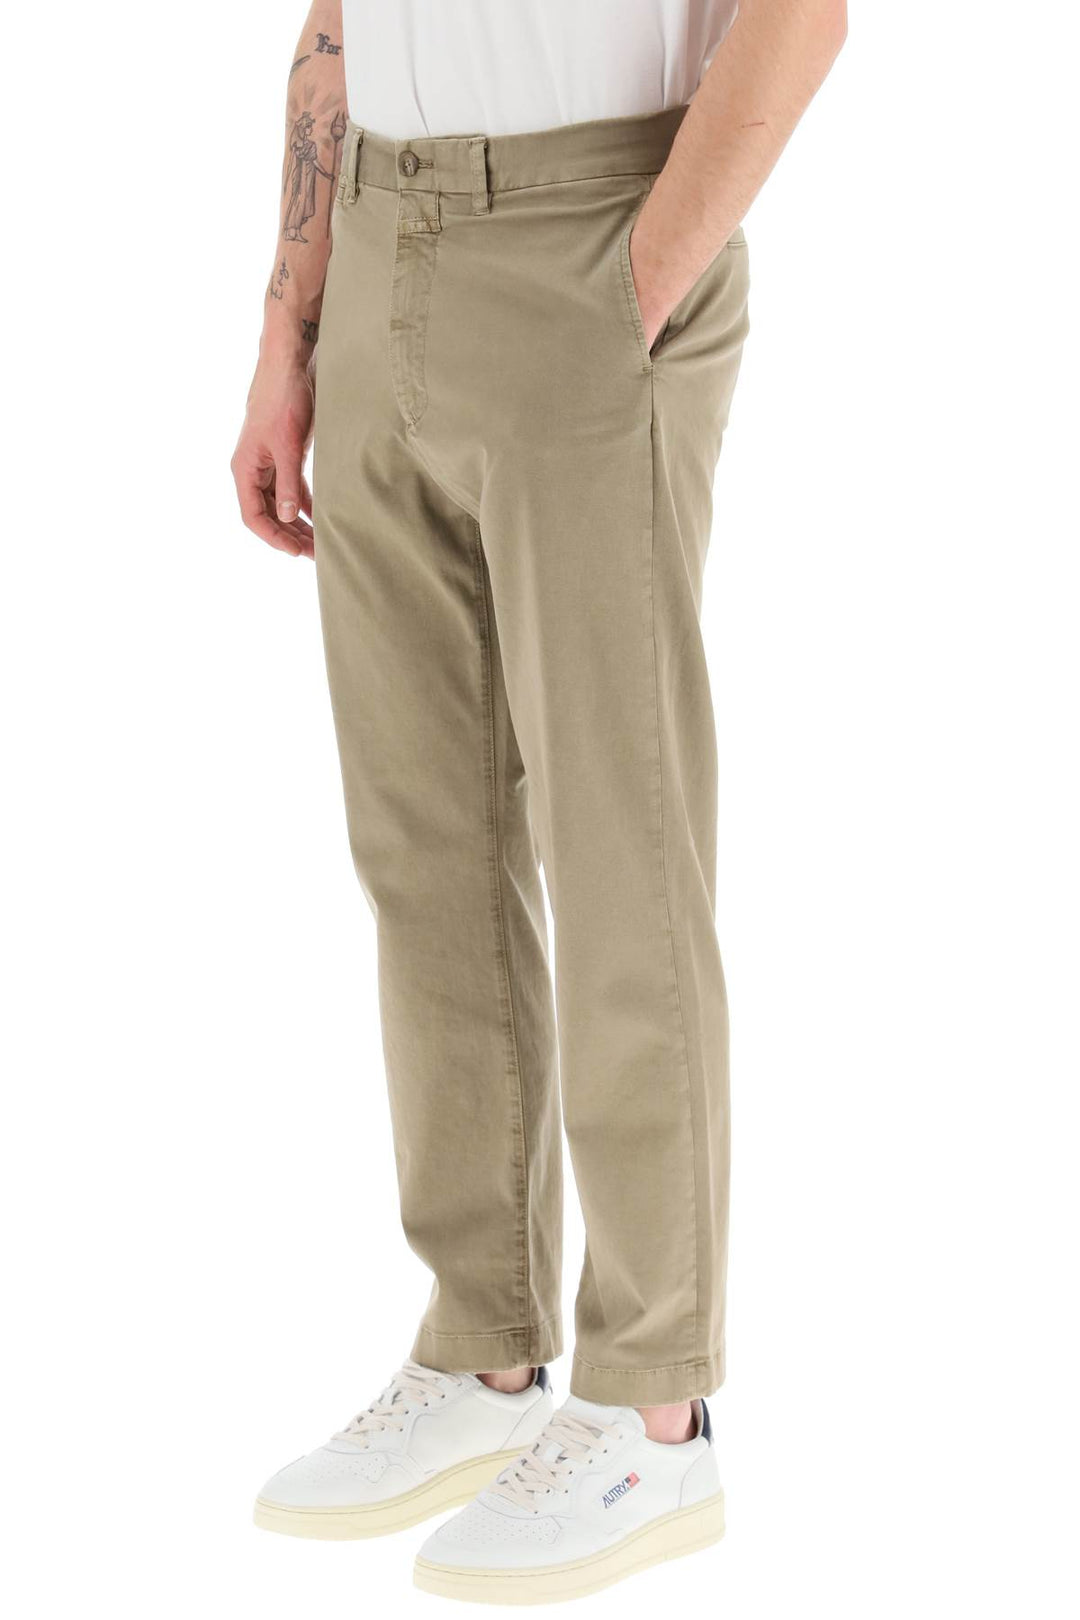 Closed 'Tacoma' Tapered Pants   Beige